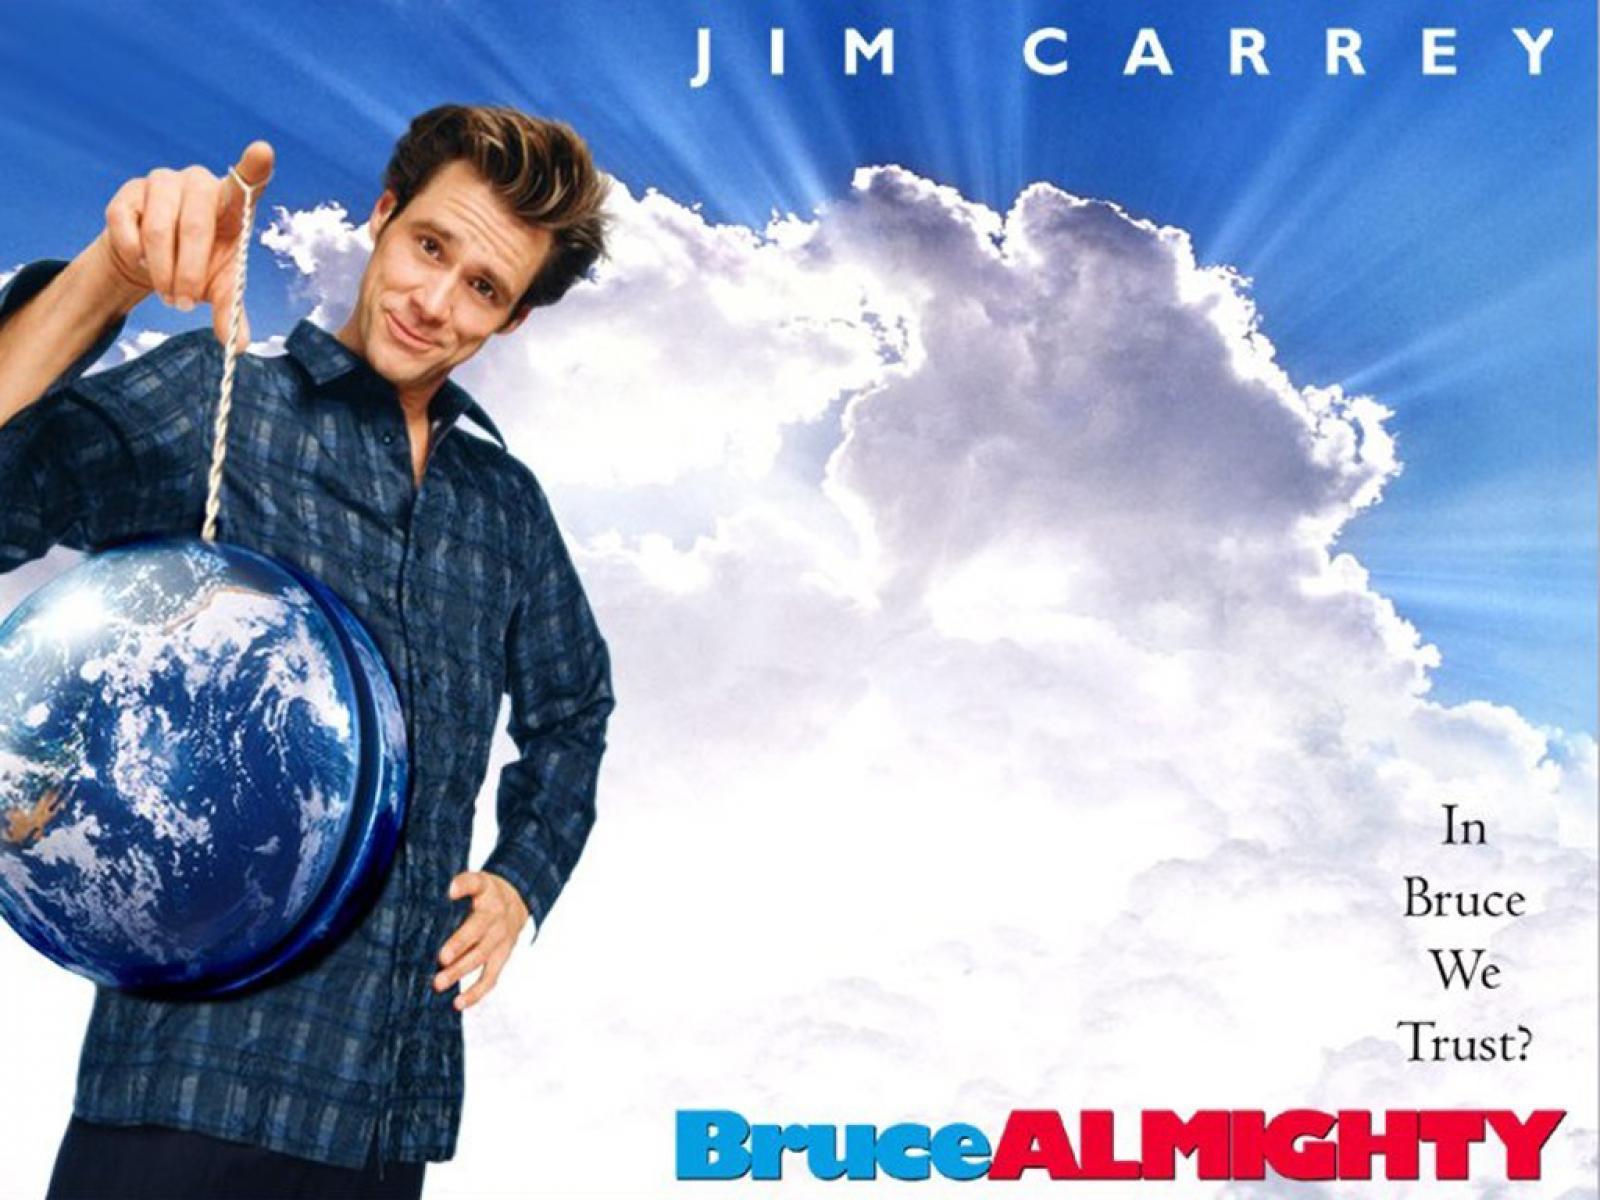 Popular Jim Carrey wallpaper and image, picture